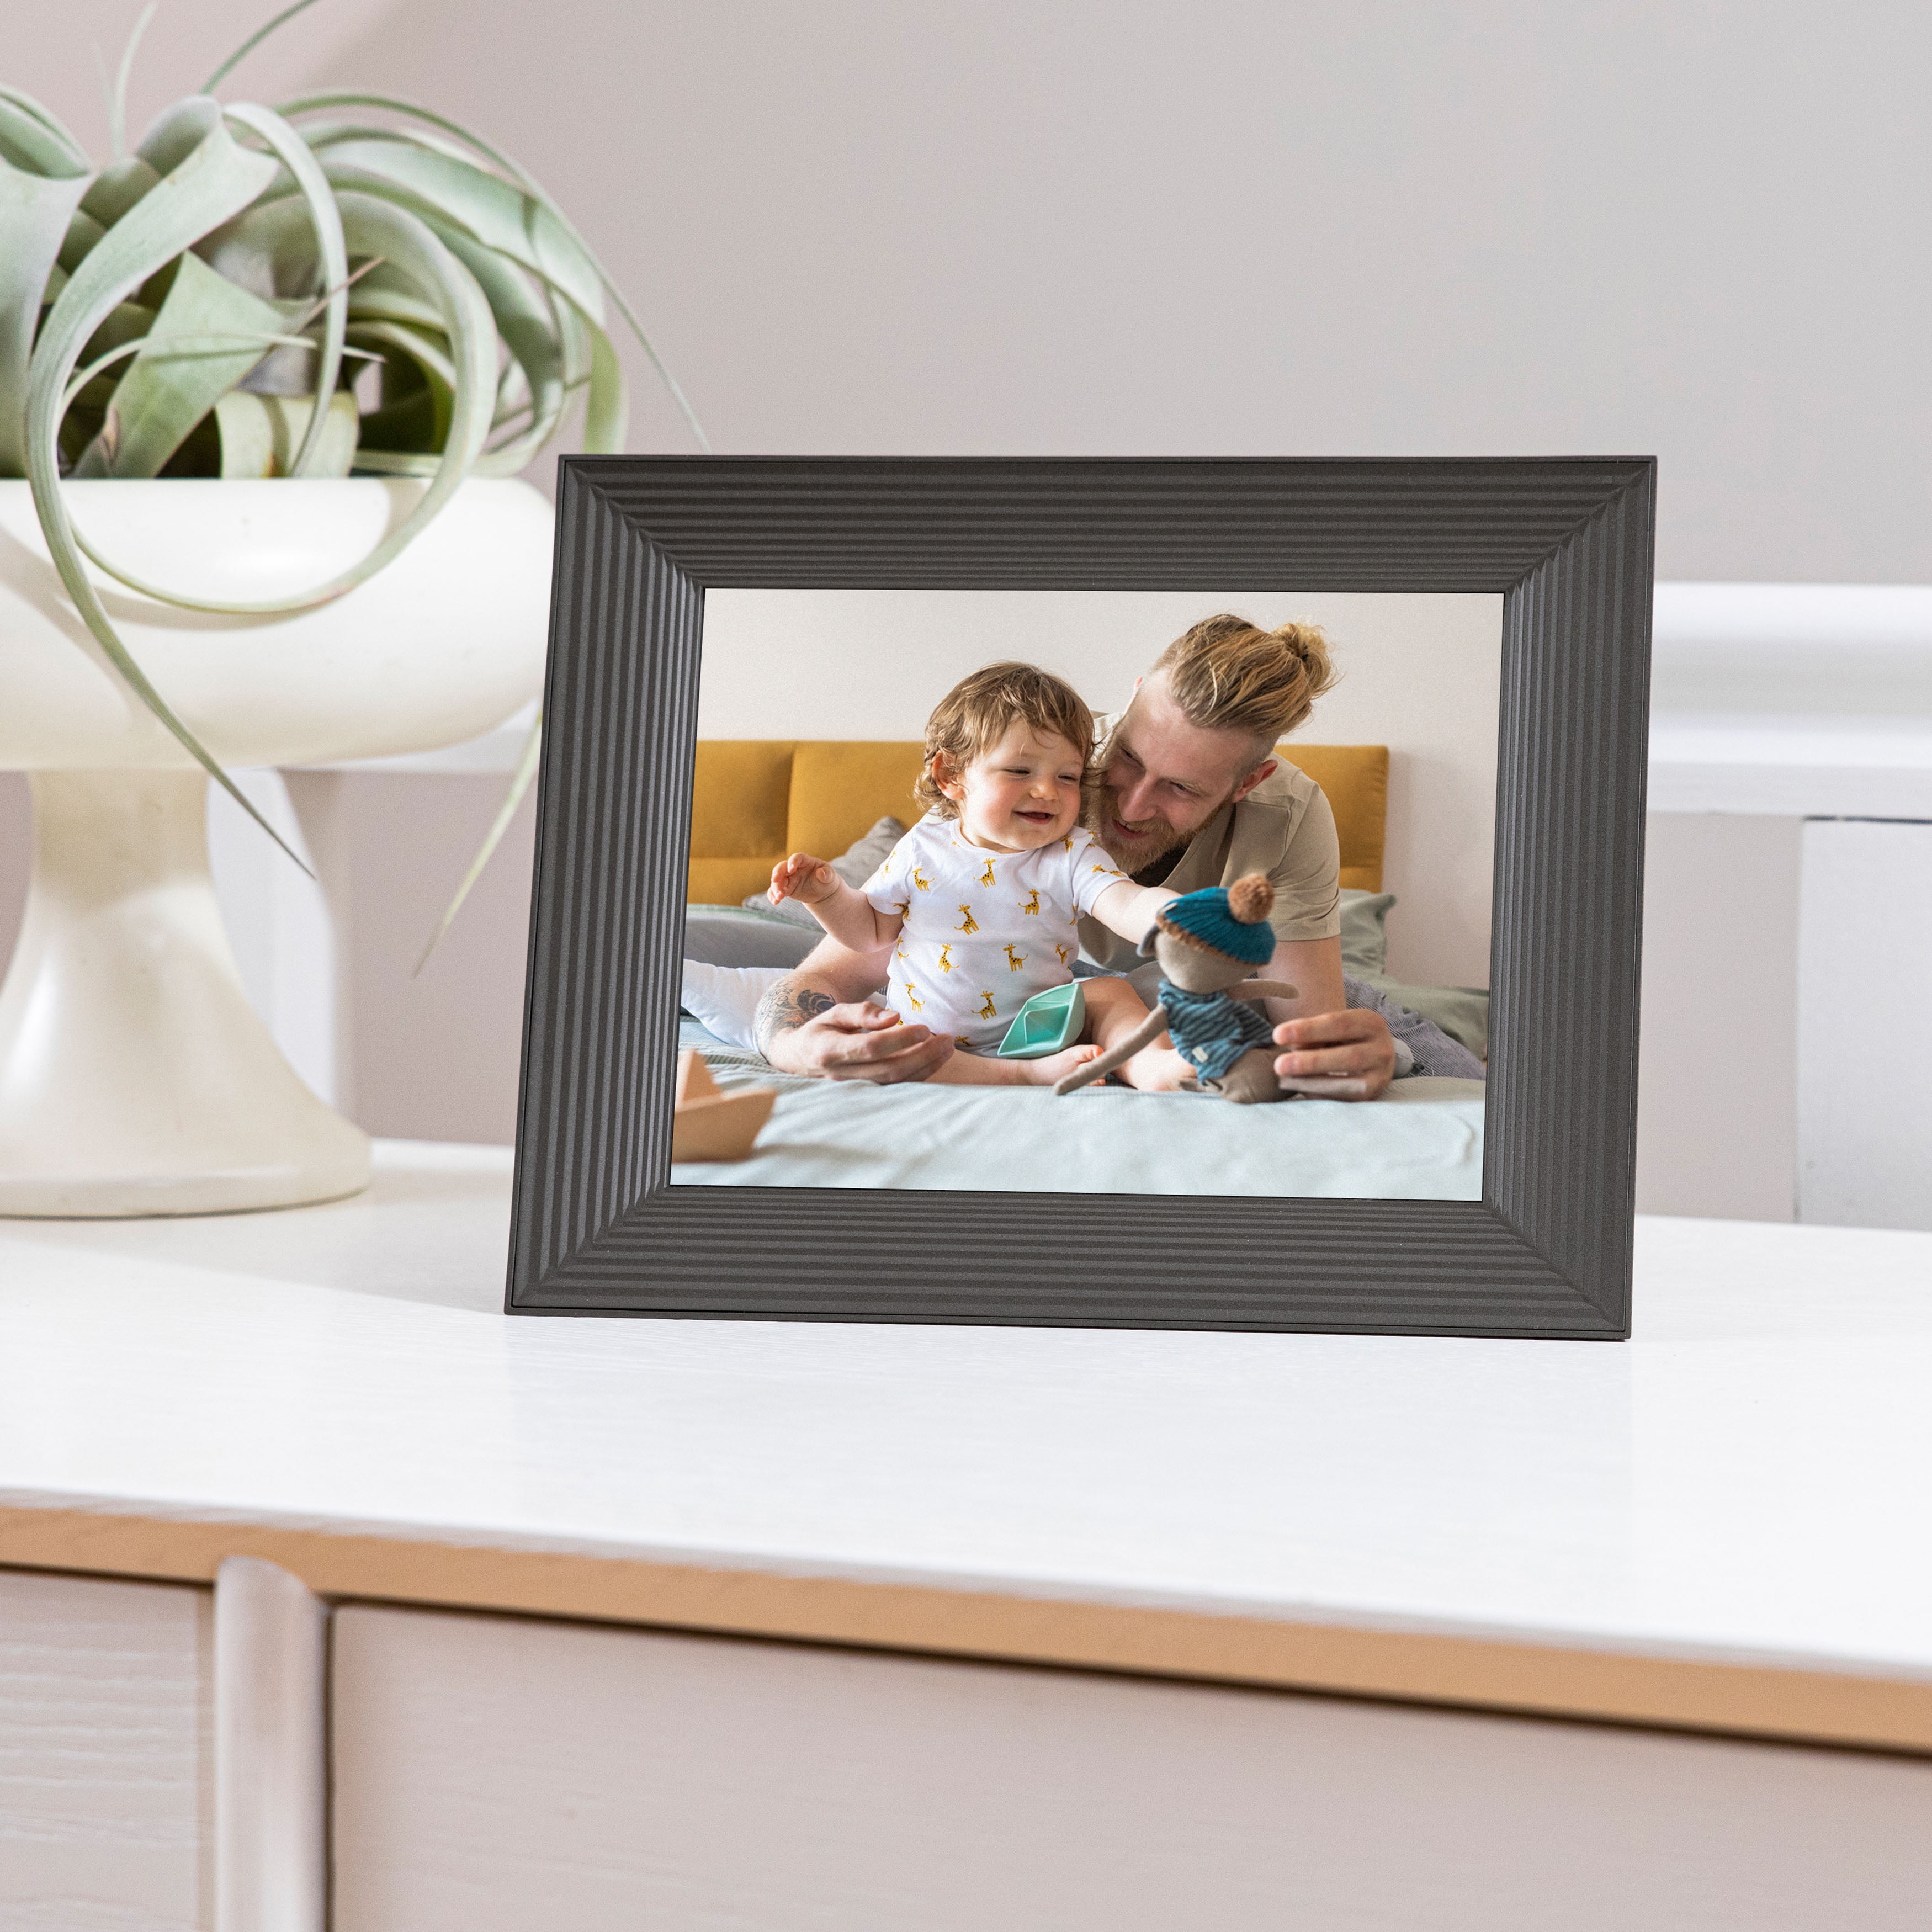 Free Unlimited Aura Frames 9-inch Frame Digital HD with Graphite Wi-Fi Mason - Storage by Picture